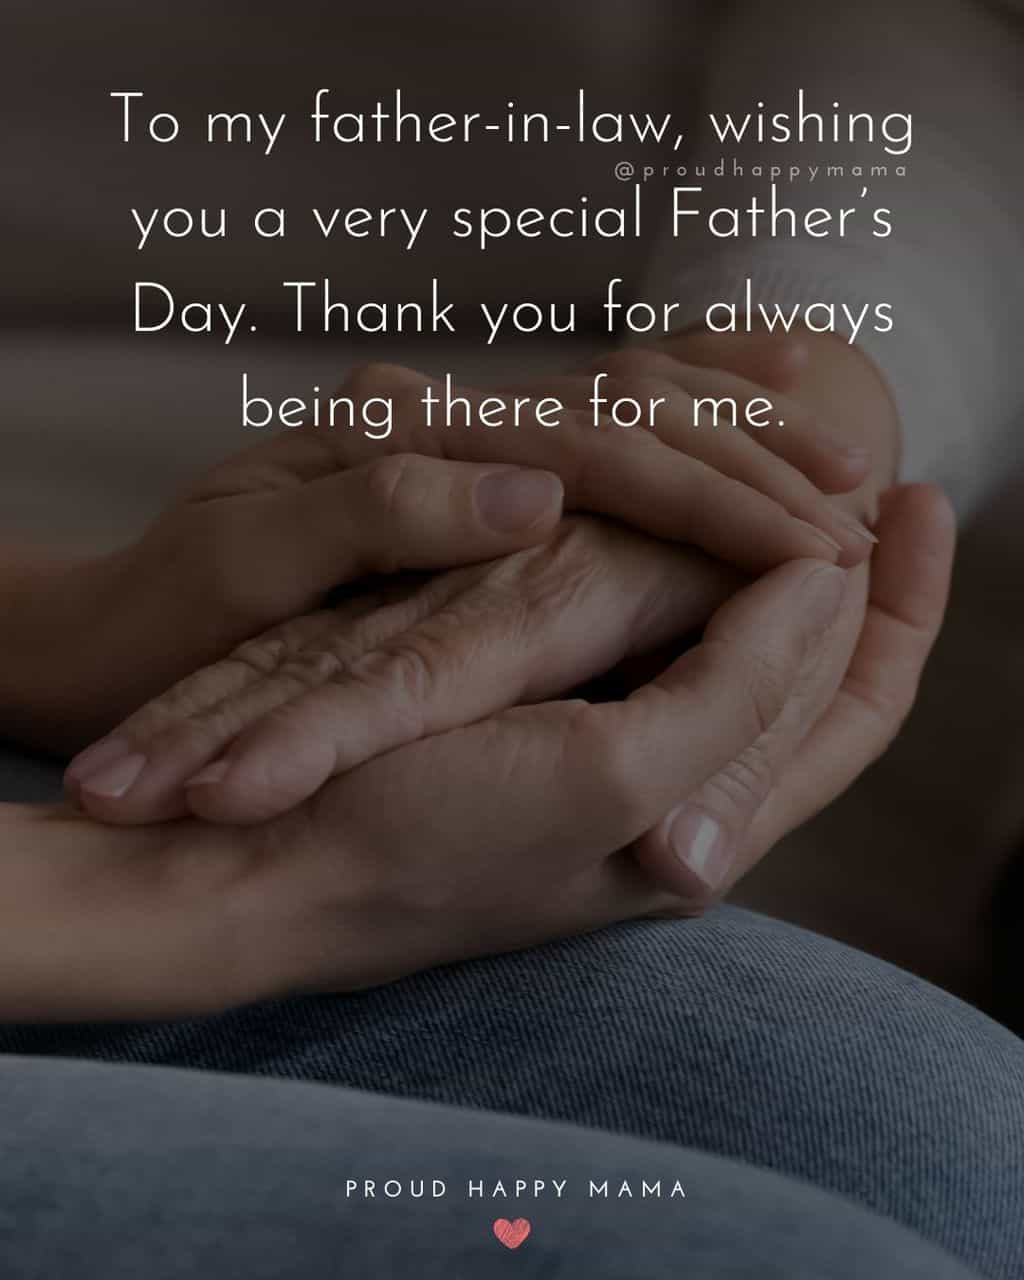 Happy Fathers Day Quotes For Father In Law - To my father in law, wishing you a very special Father’s Day. Thank you for always